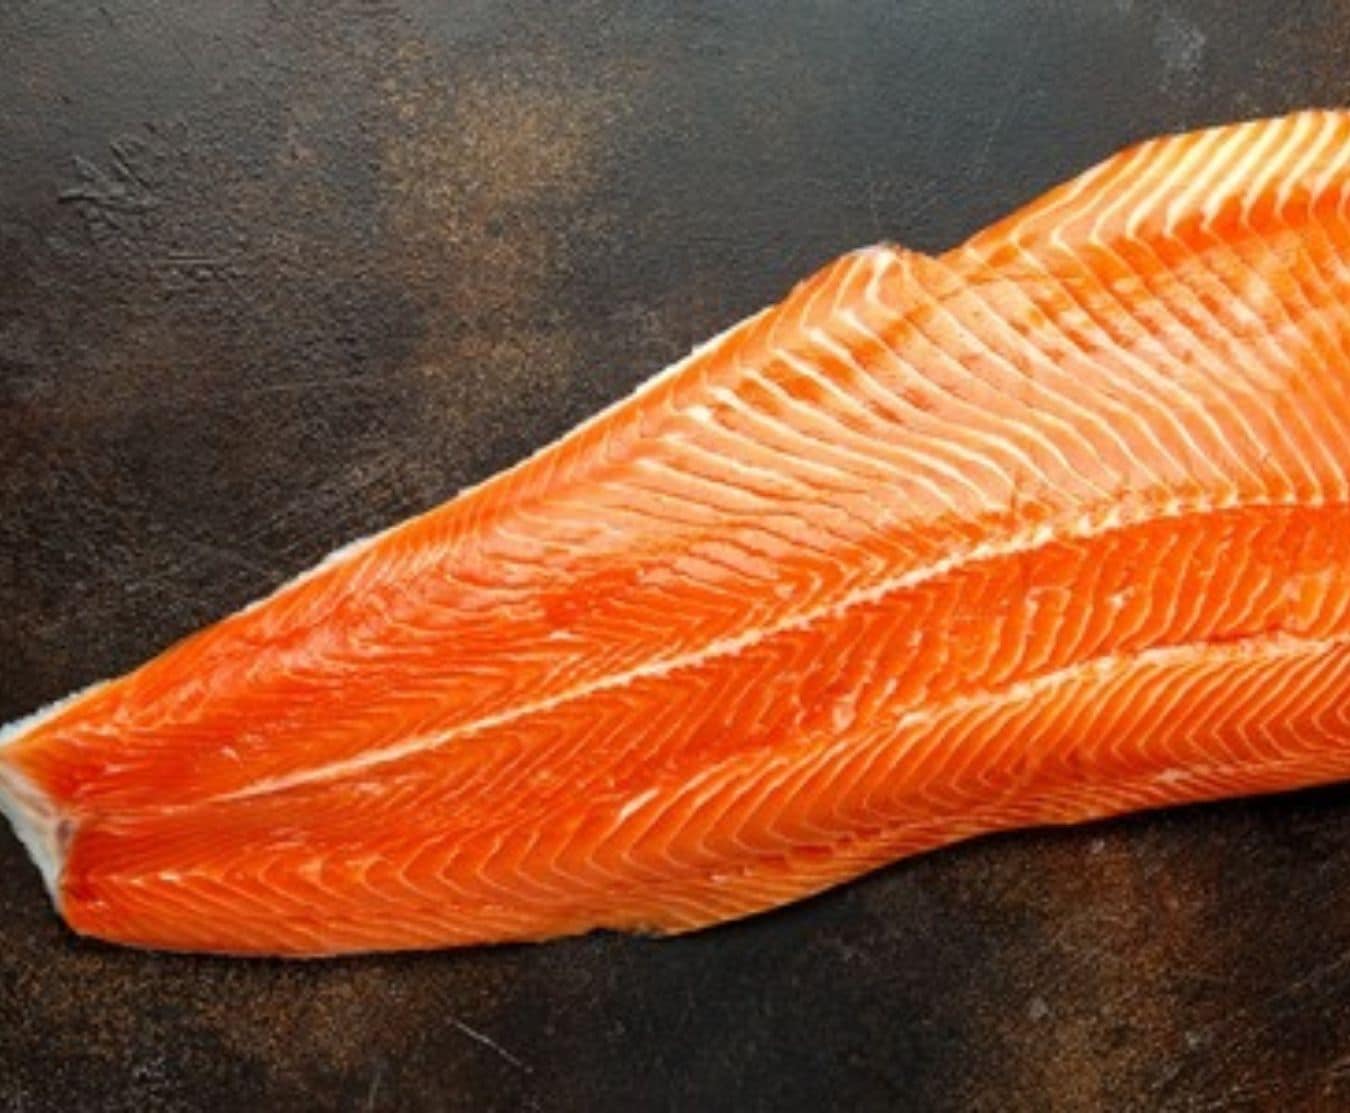 Buy Coho Salmon Fillet 800g-900g Online at the Best Price, Free UK ...